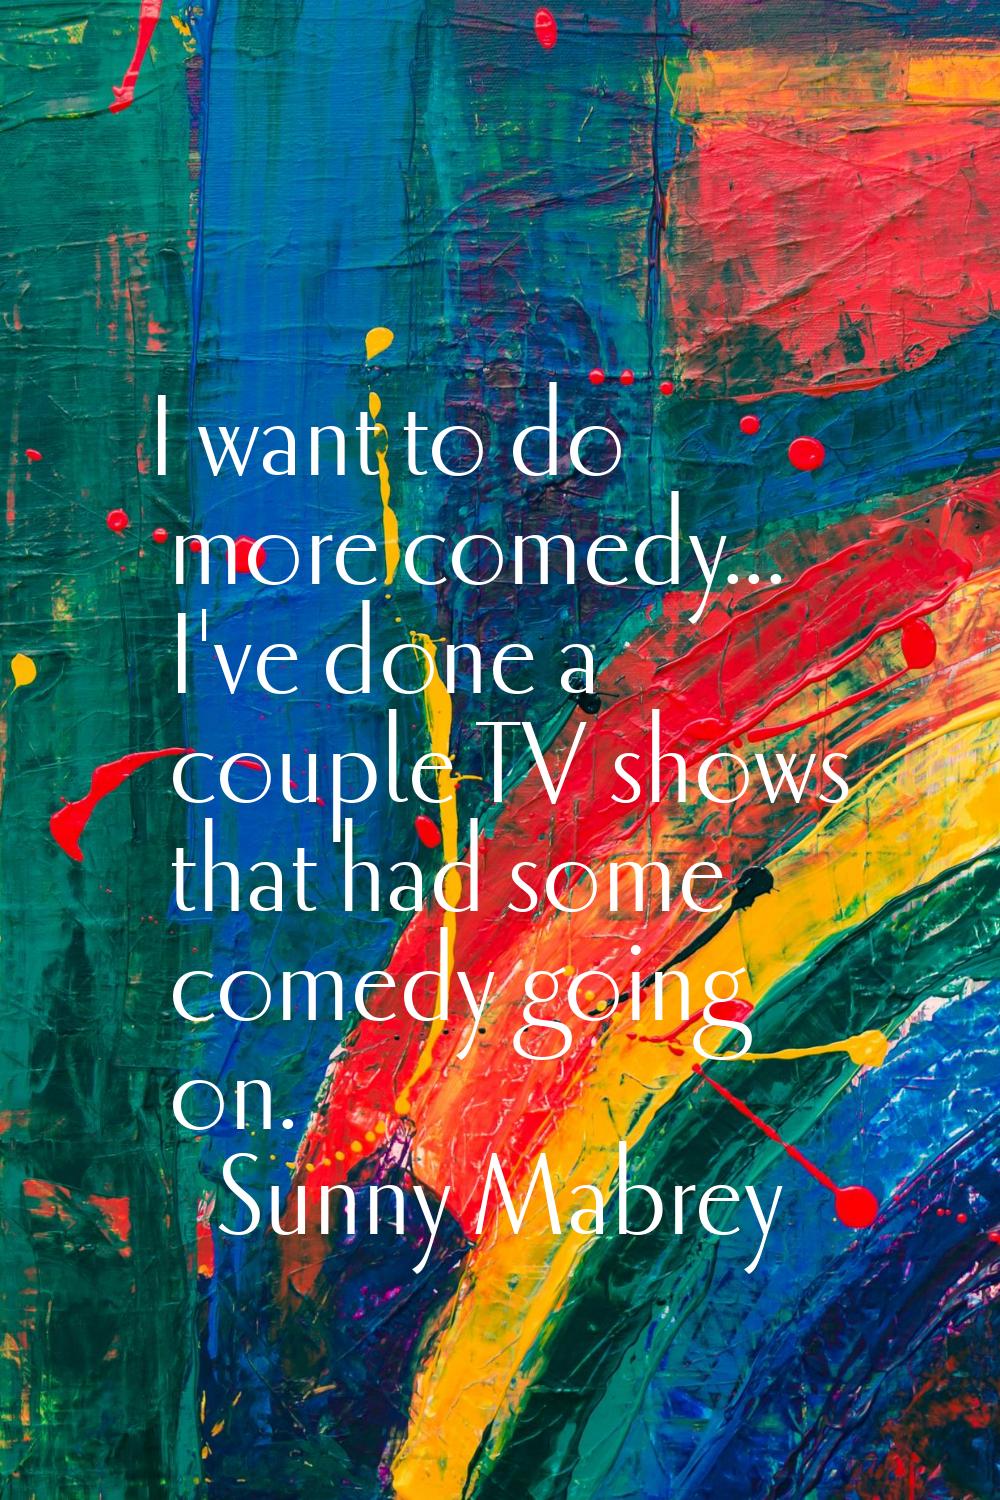 I want to do more comedy... I've done a couple TV shows that had some comedy going on.